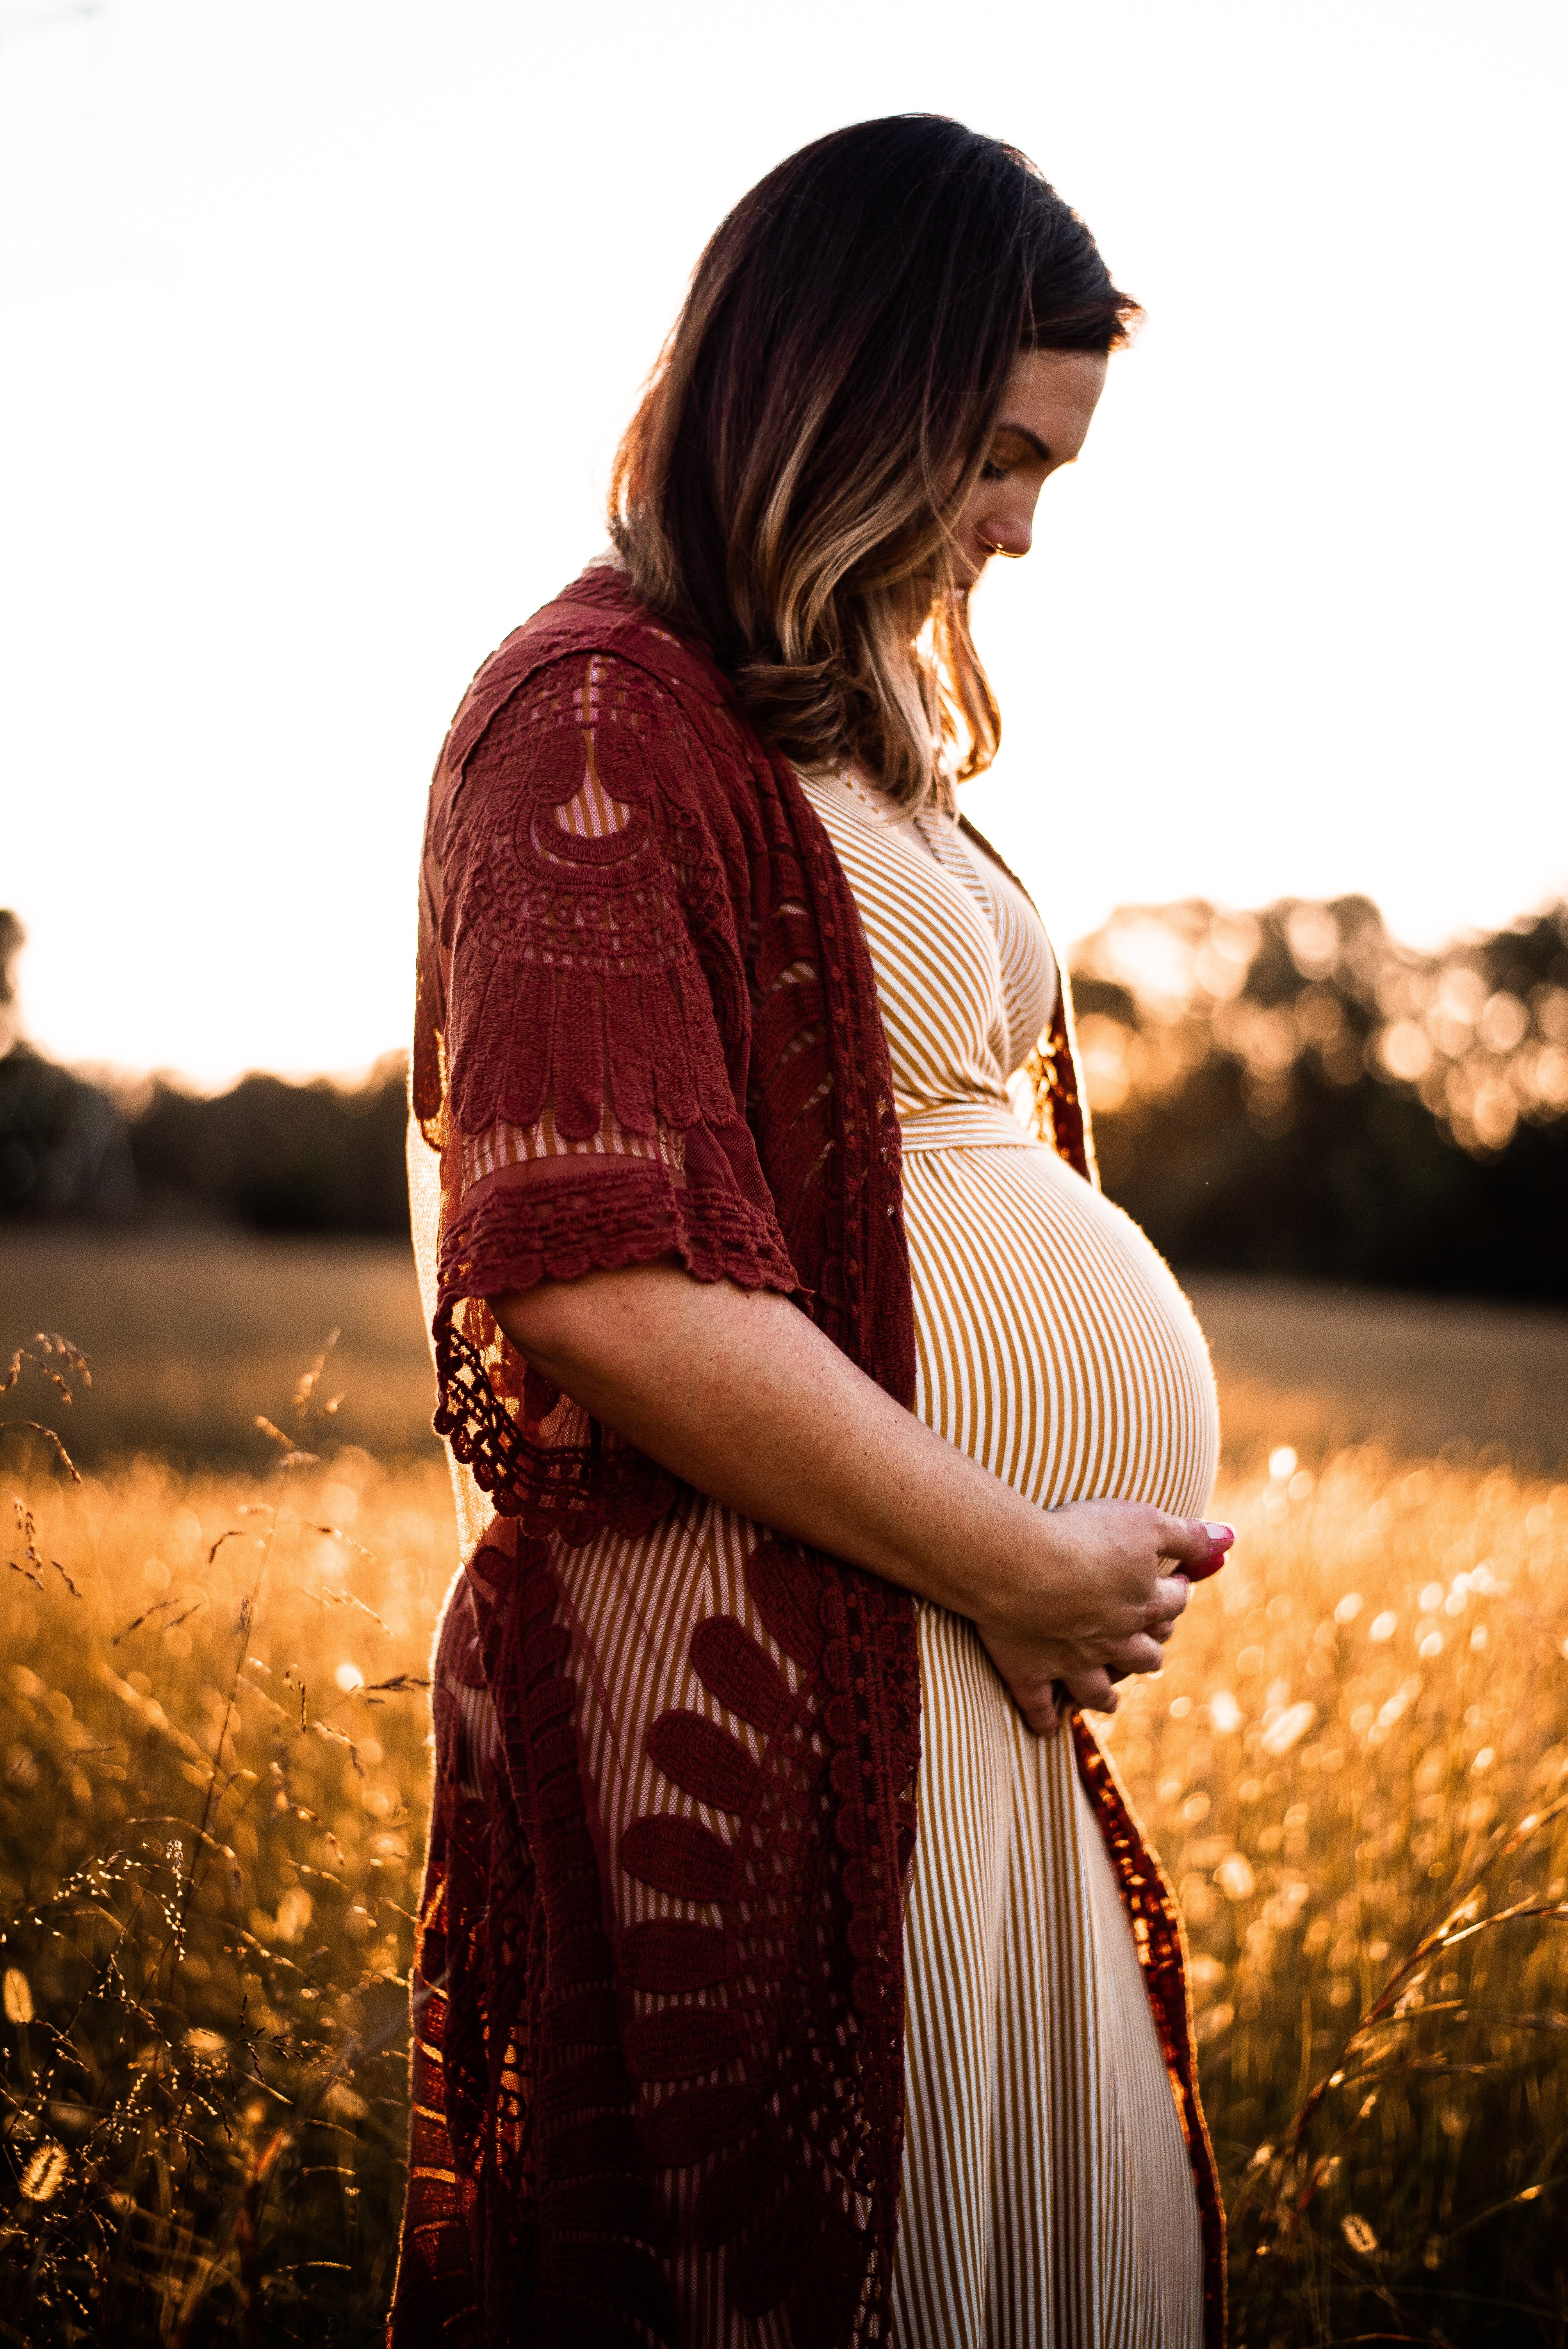 After years of heartbreak, Maggie was finally pregnant. | Source: Unsplash